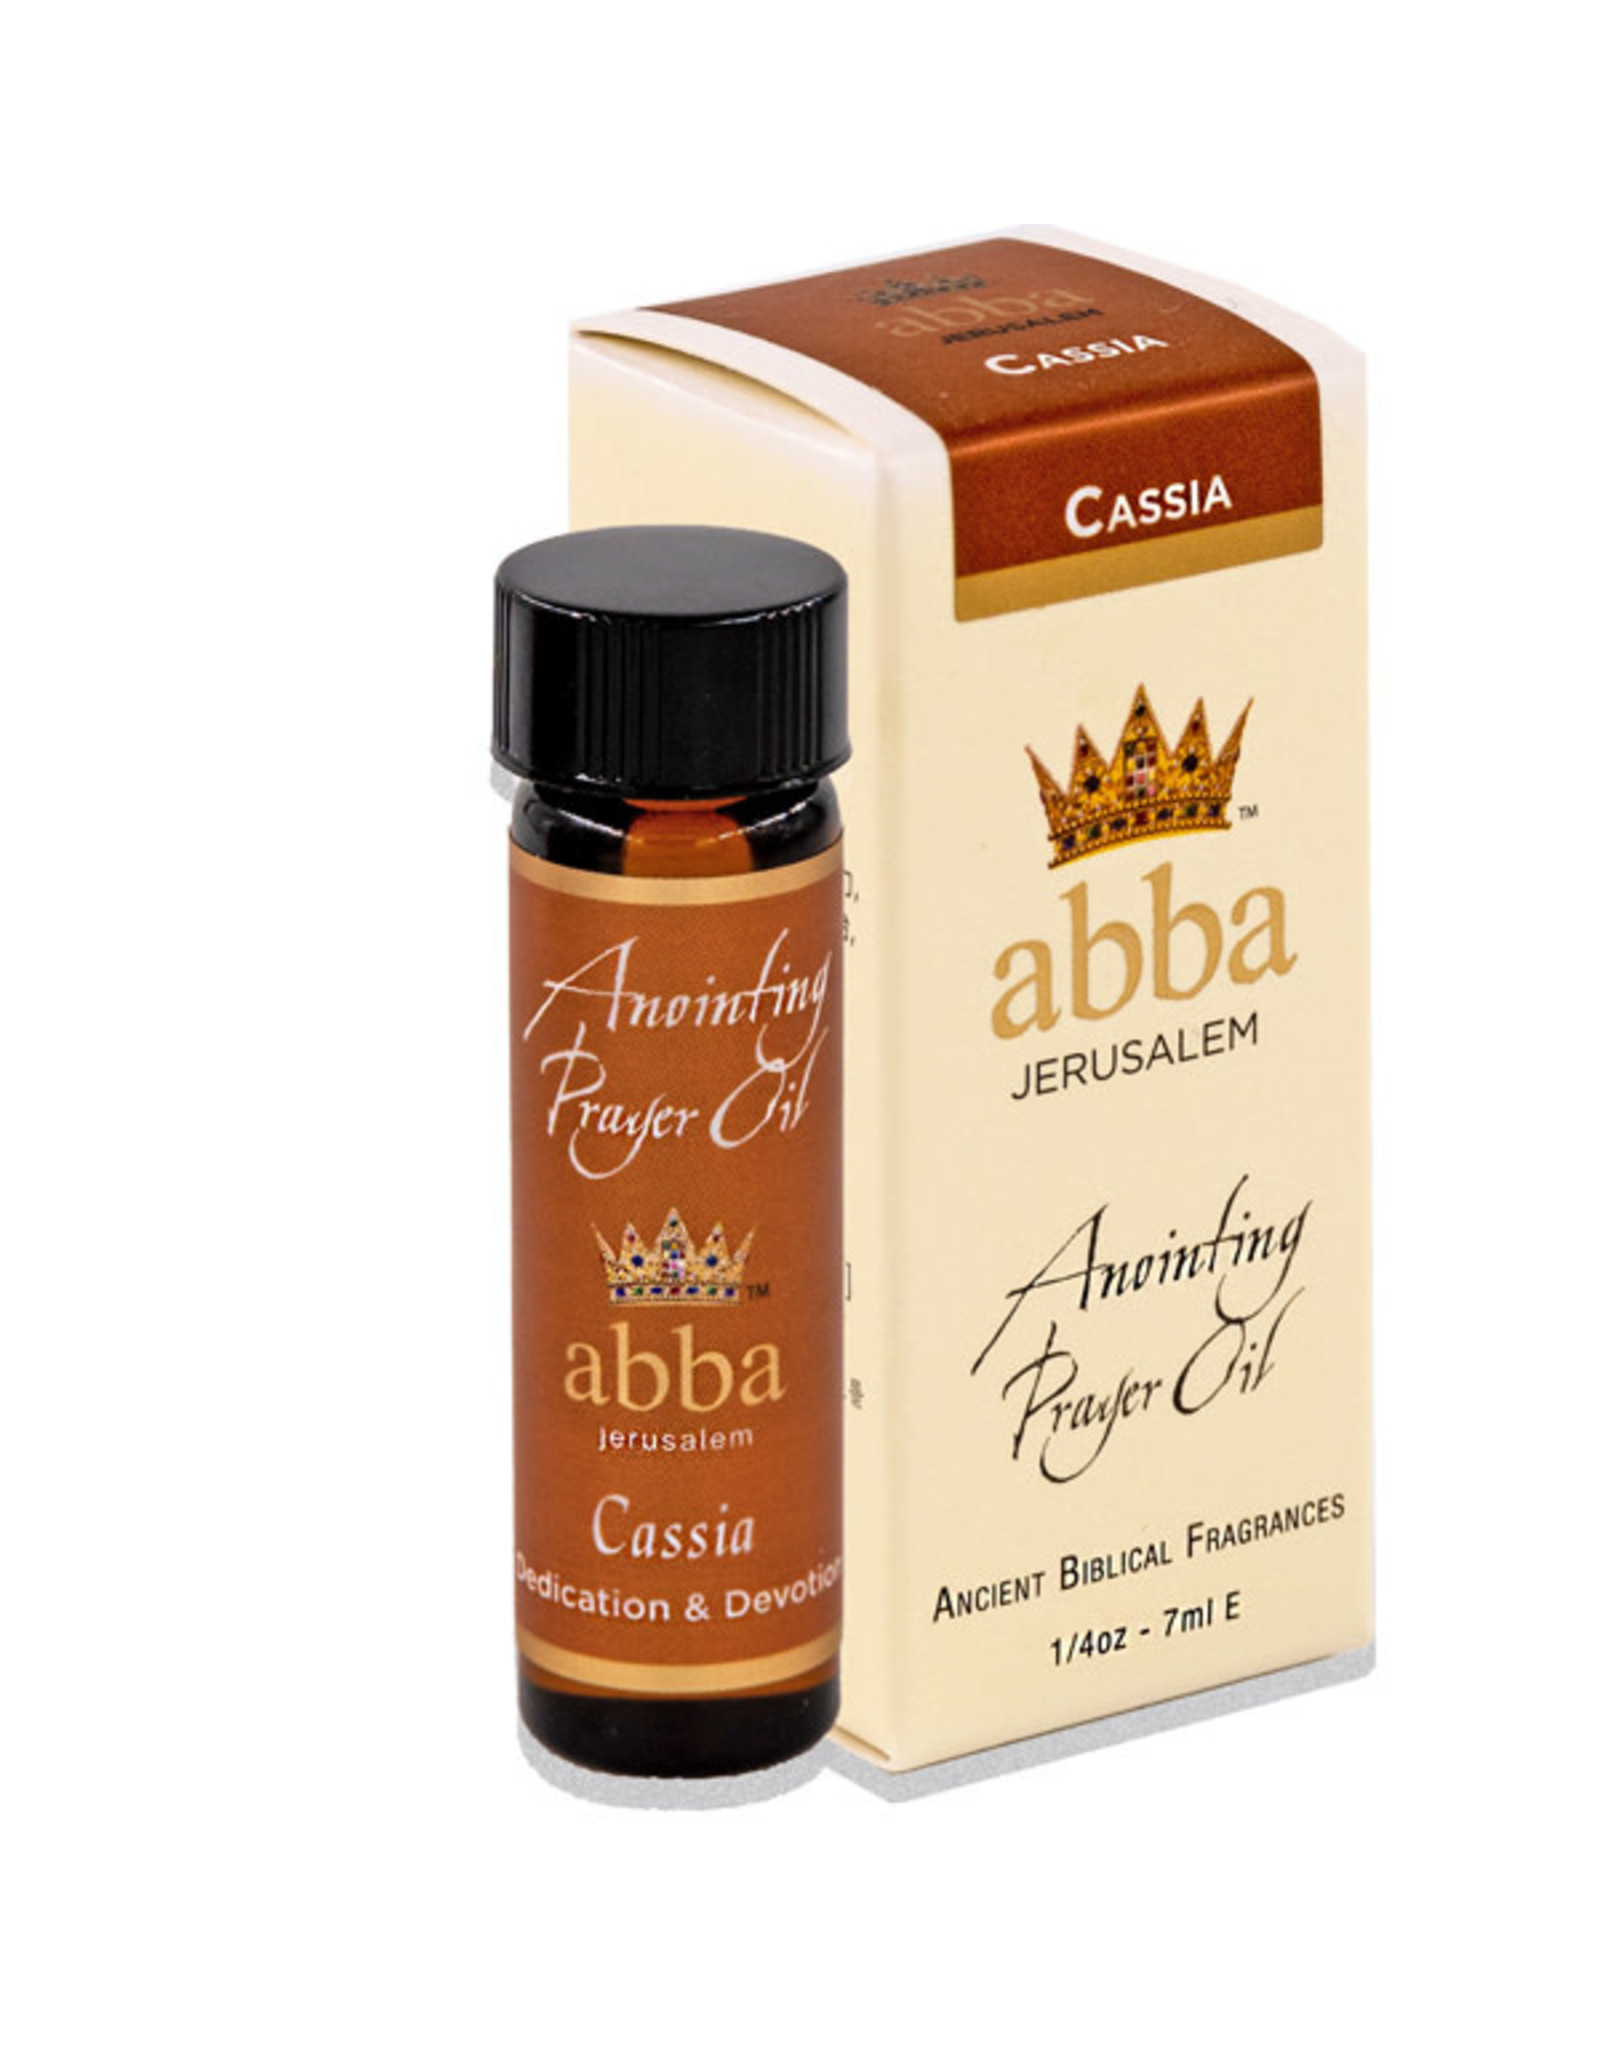 Abba Oil Anointing Oil - Cassia (Dedication and Devotion), 0.25oz